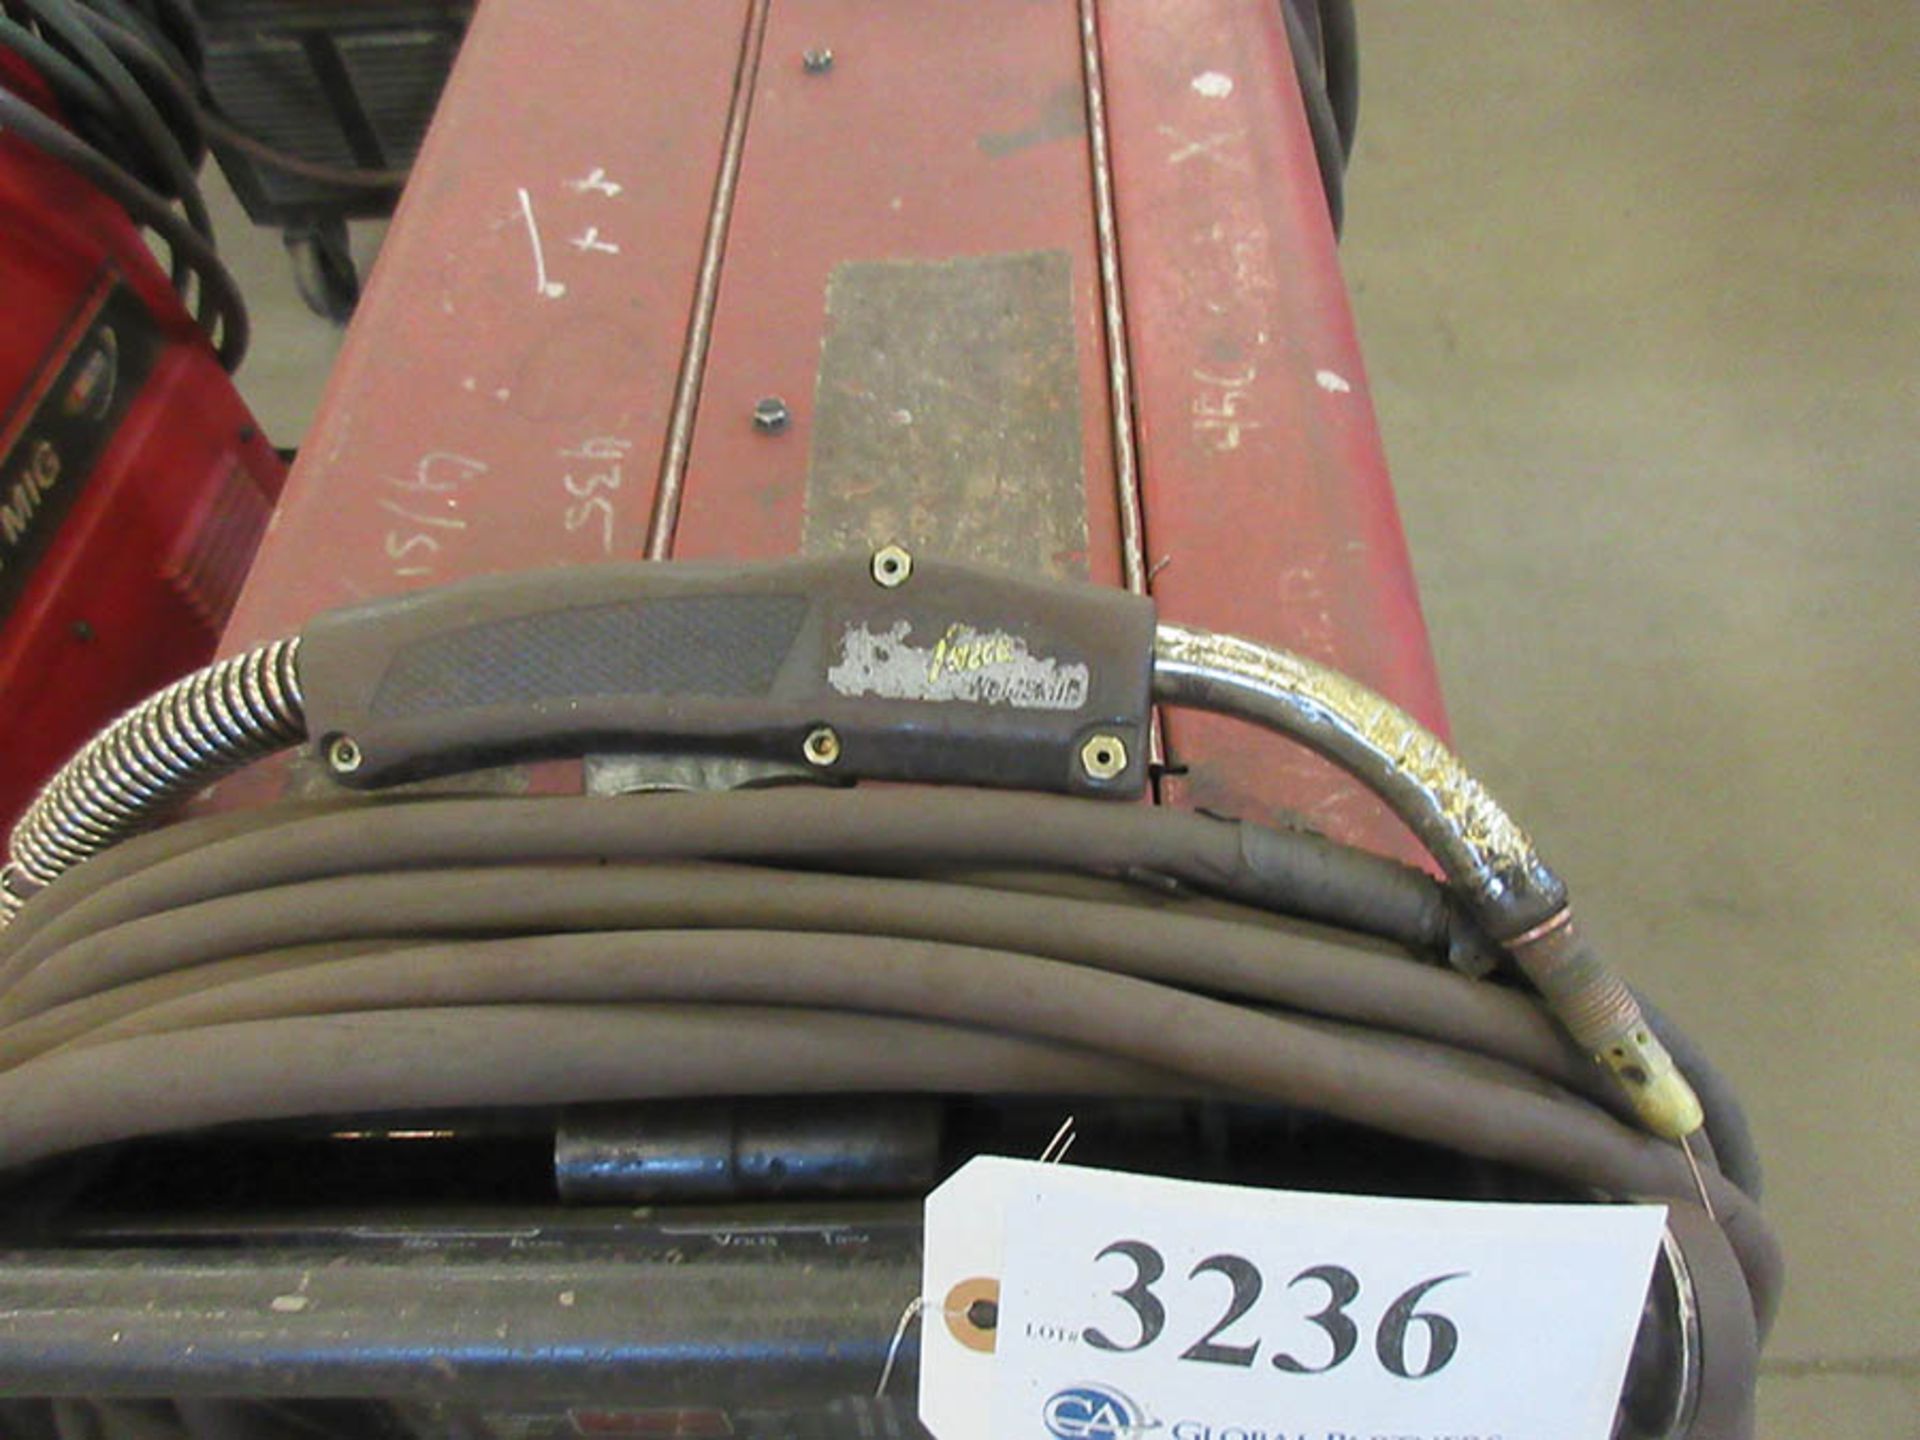 LINCOLN ELECTRIC 350MP POWER MIG WELDER WITH TWECO WELDSKILL MIG GUN, #87 - Image 3 of 3